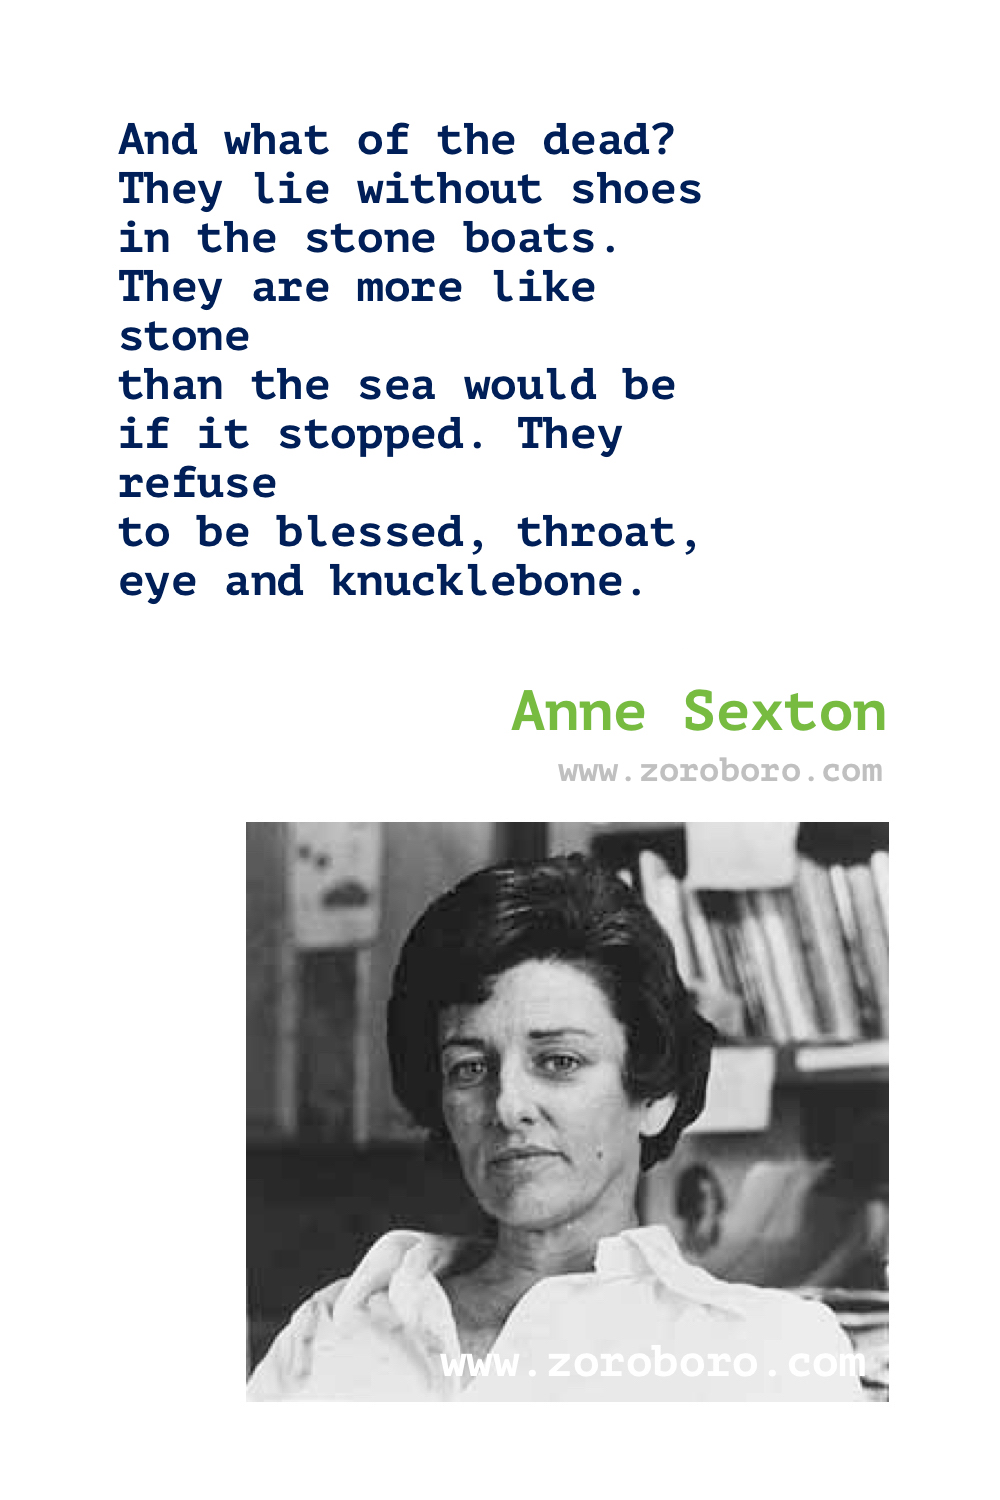 Anne Sexton Quotes. Anne Sexton Poems. Poetry. Anne Sexton Books Quotes. Poems By Anne Sexton.